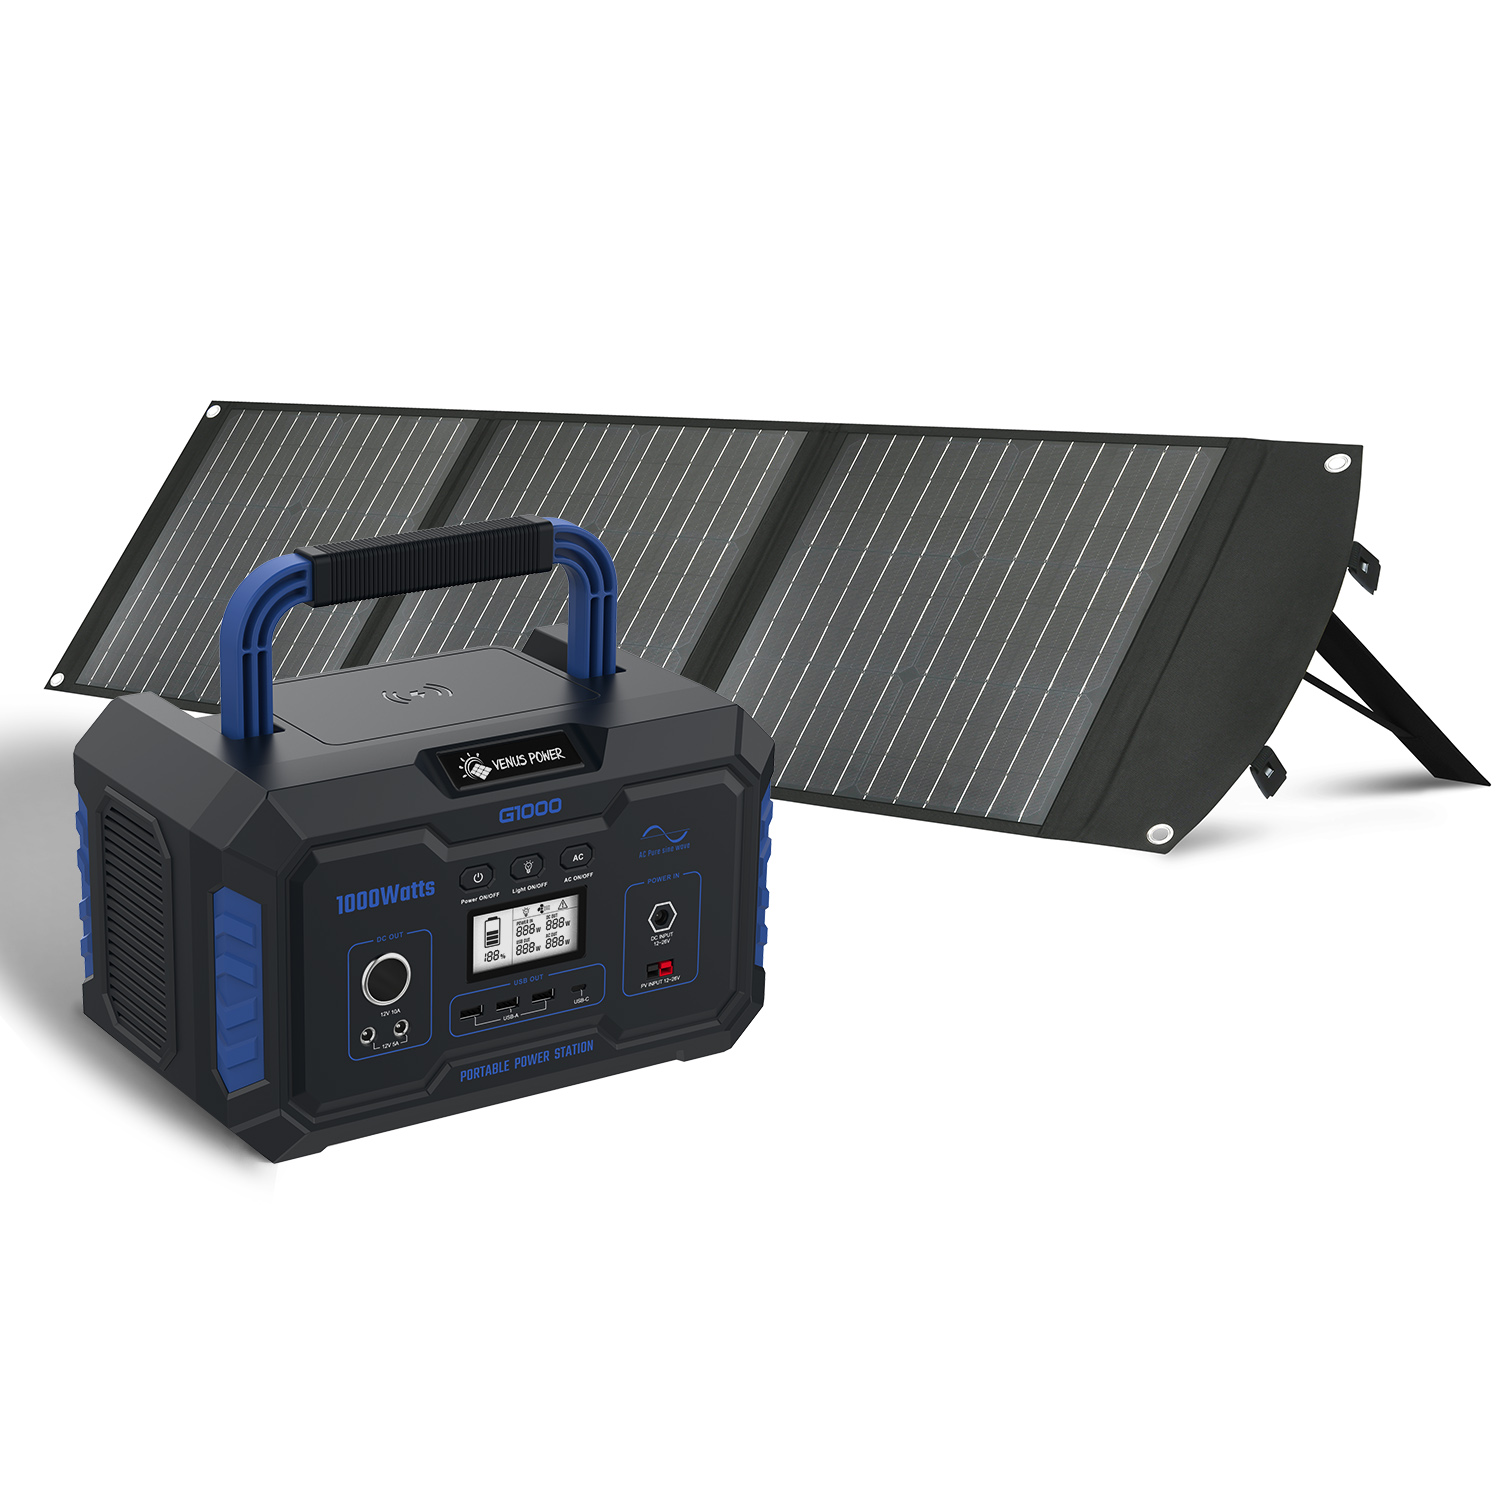 Outdoor Draagbare Krachtcentrale Lithium Ion Camping Krachtcentrale 1000 Watt